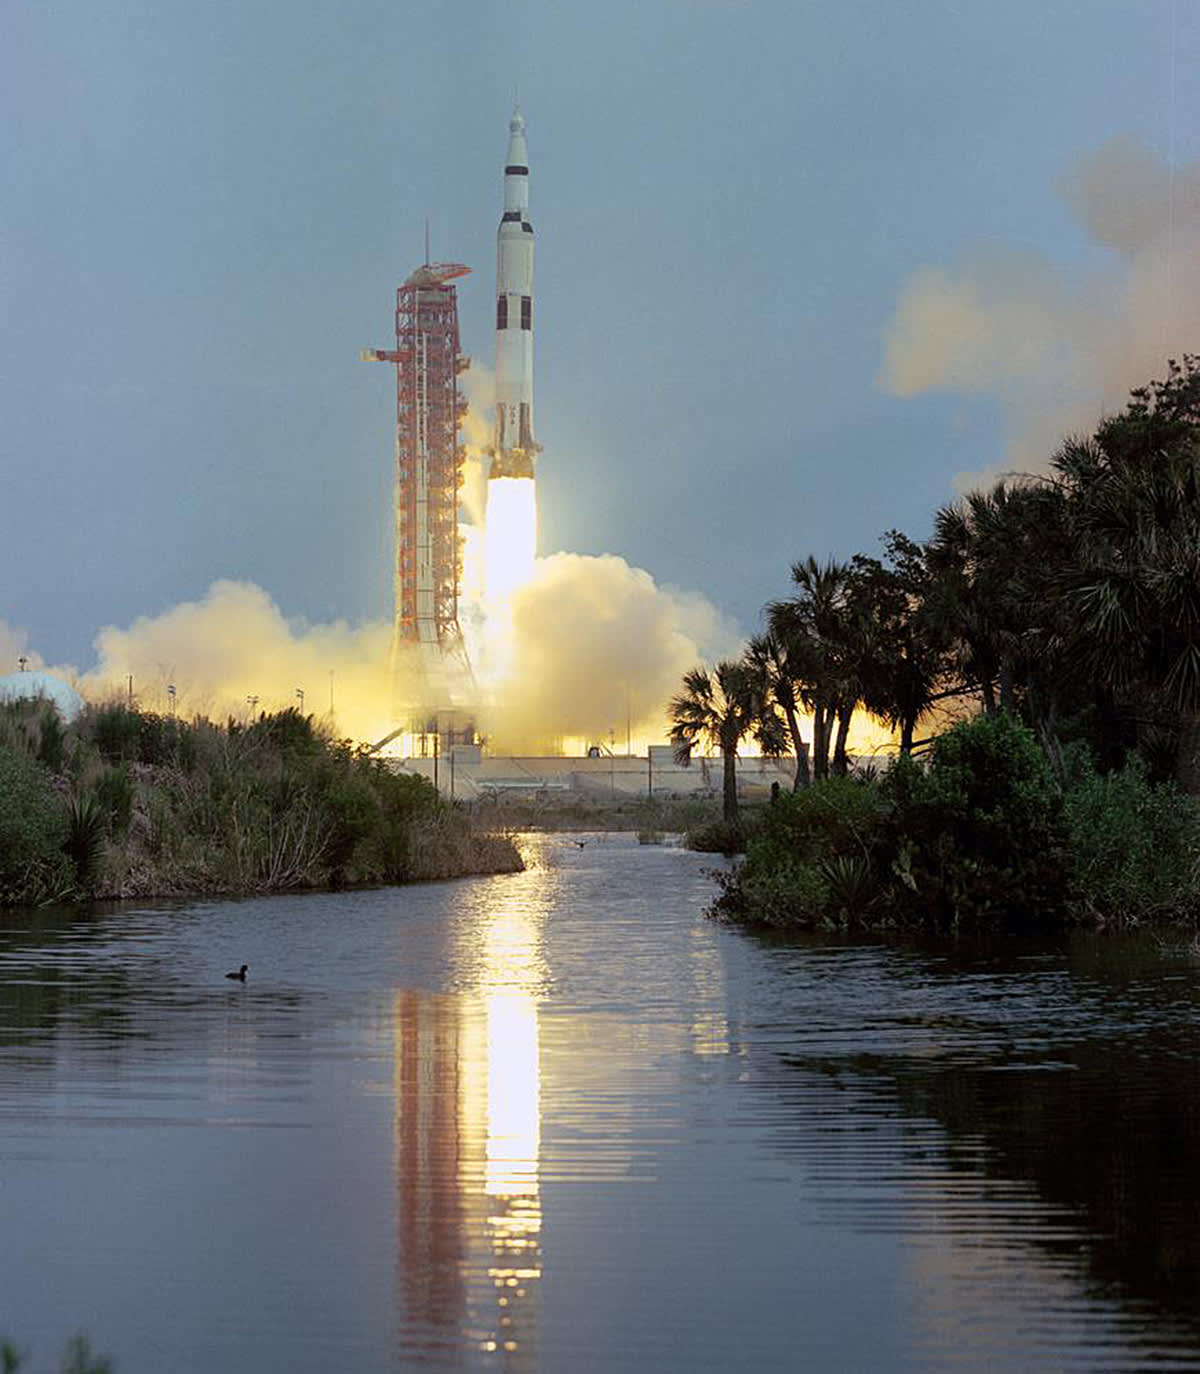 Houston, we've had a problem': 50 years after Apollo 13's near-tragedy